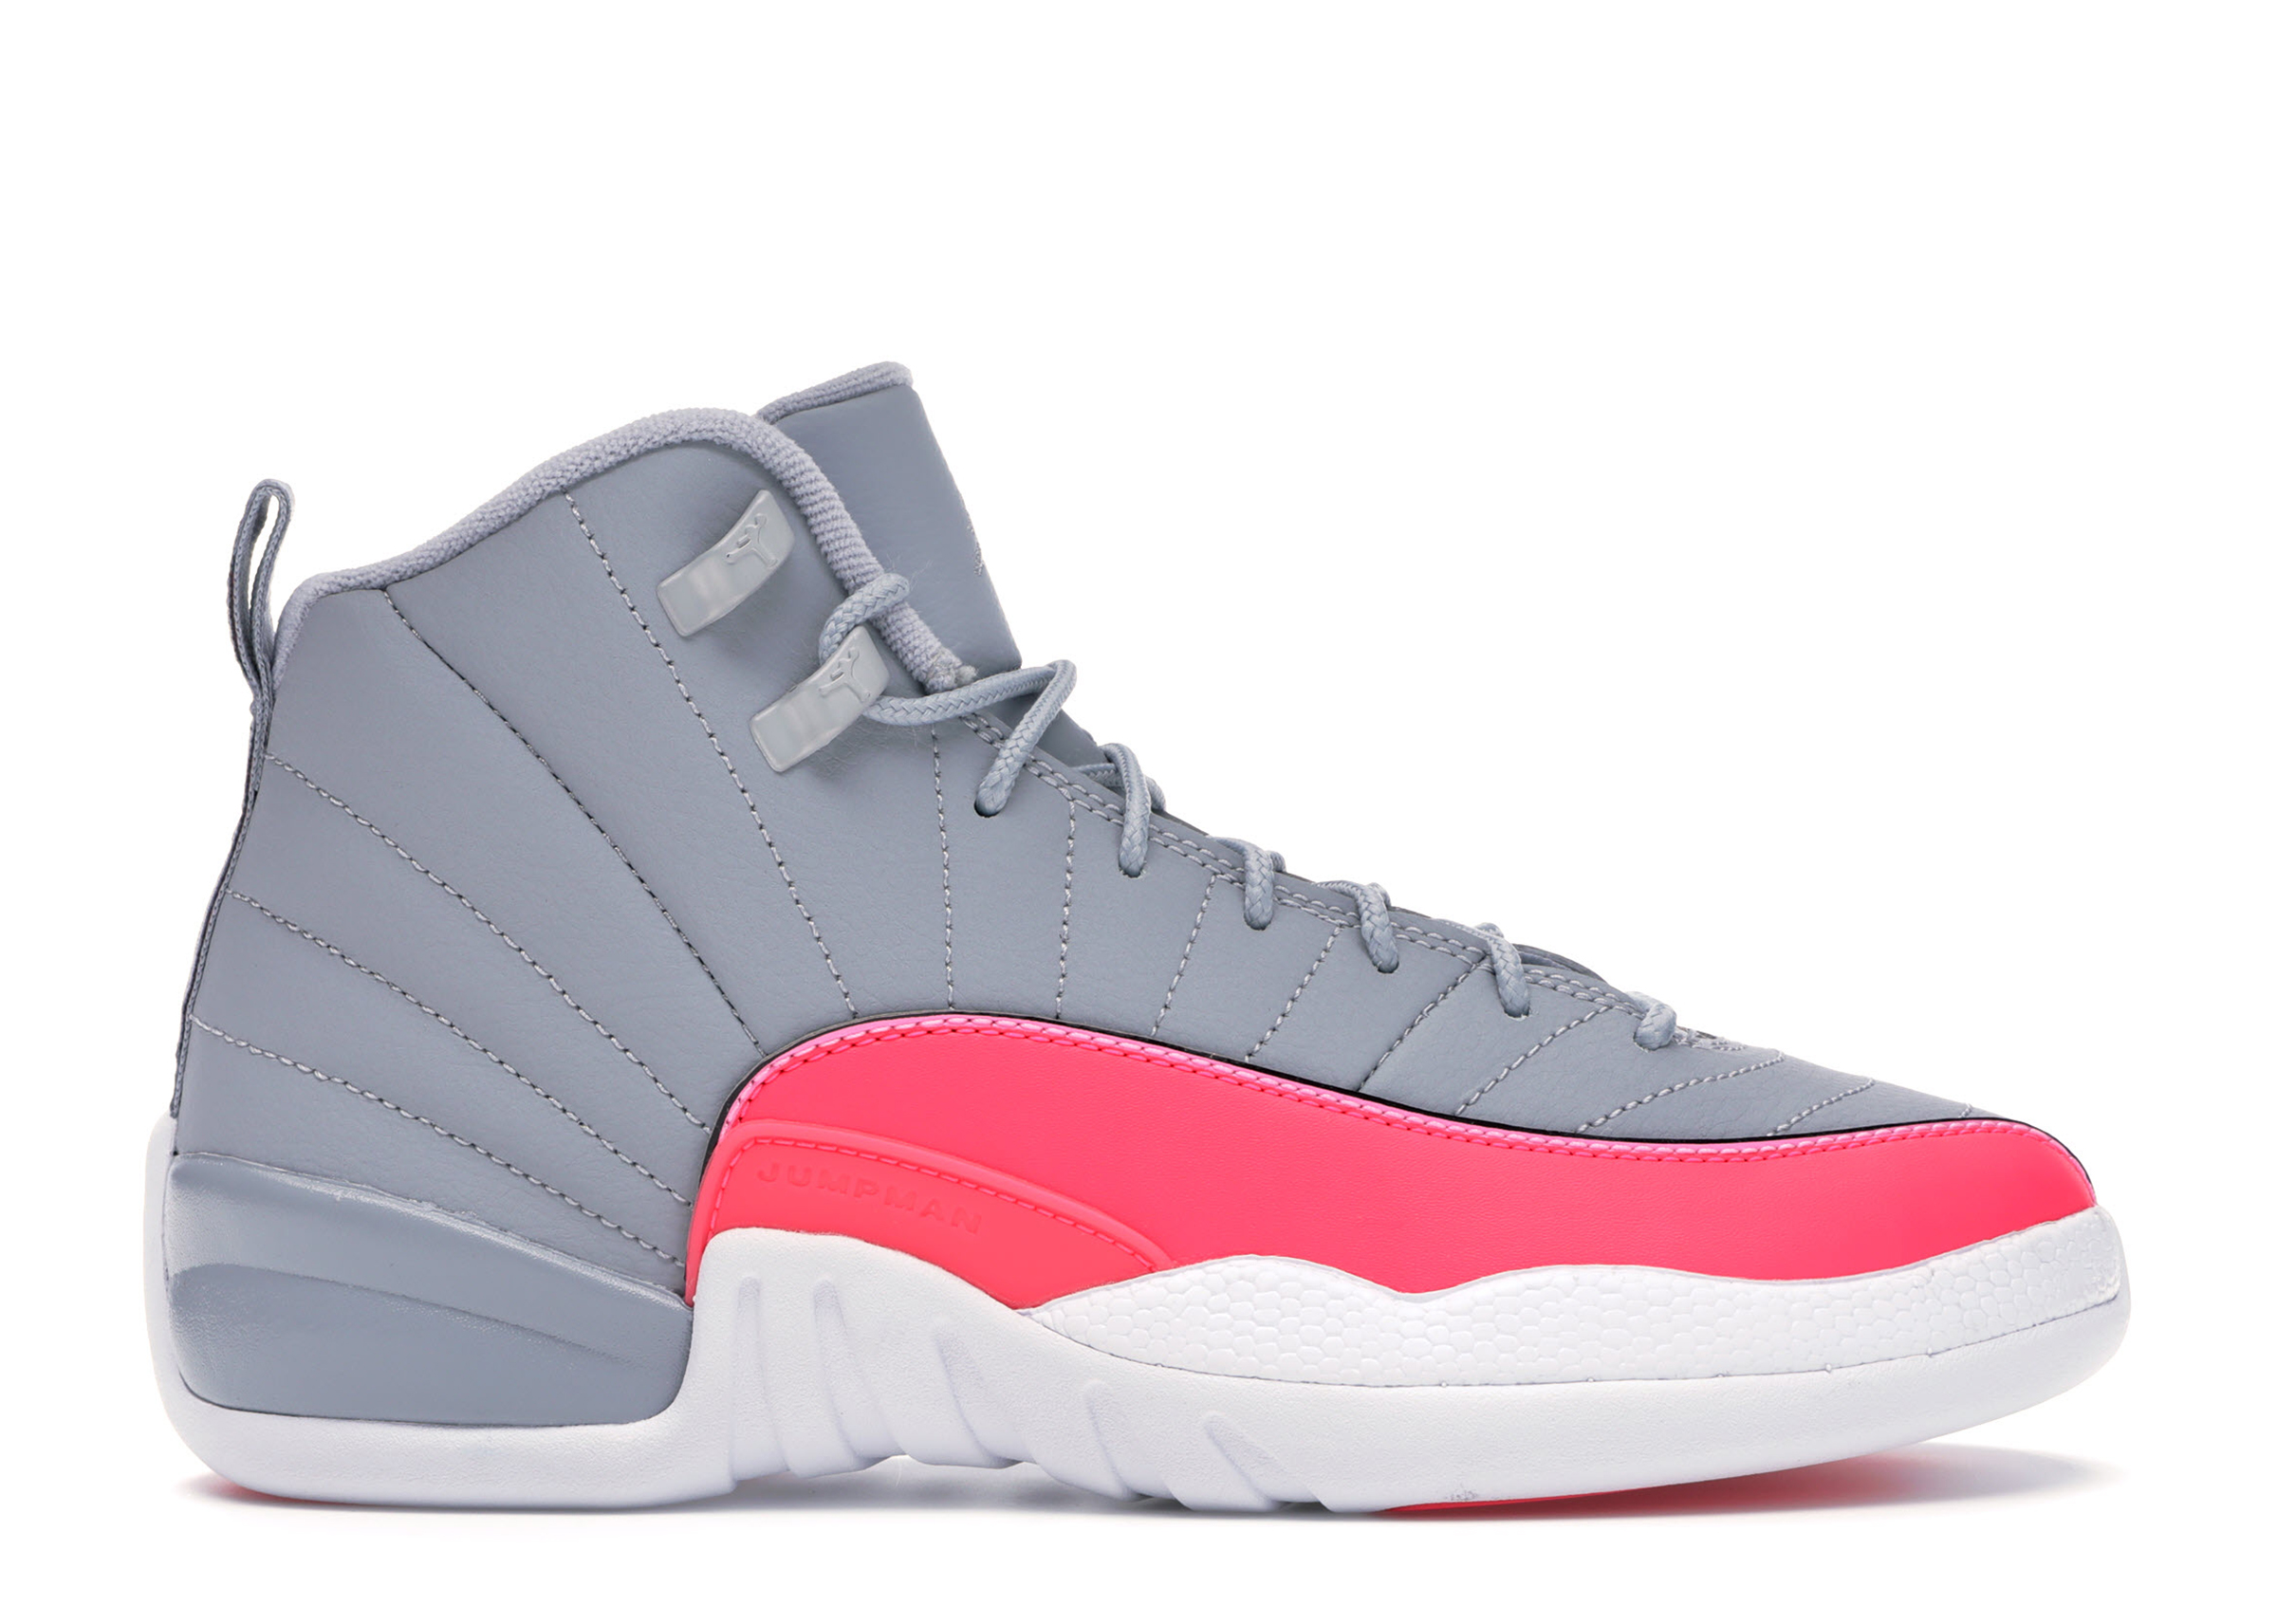 pink and gray 12s jordans